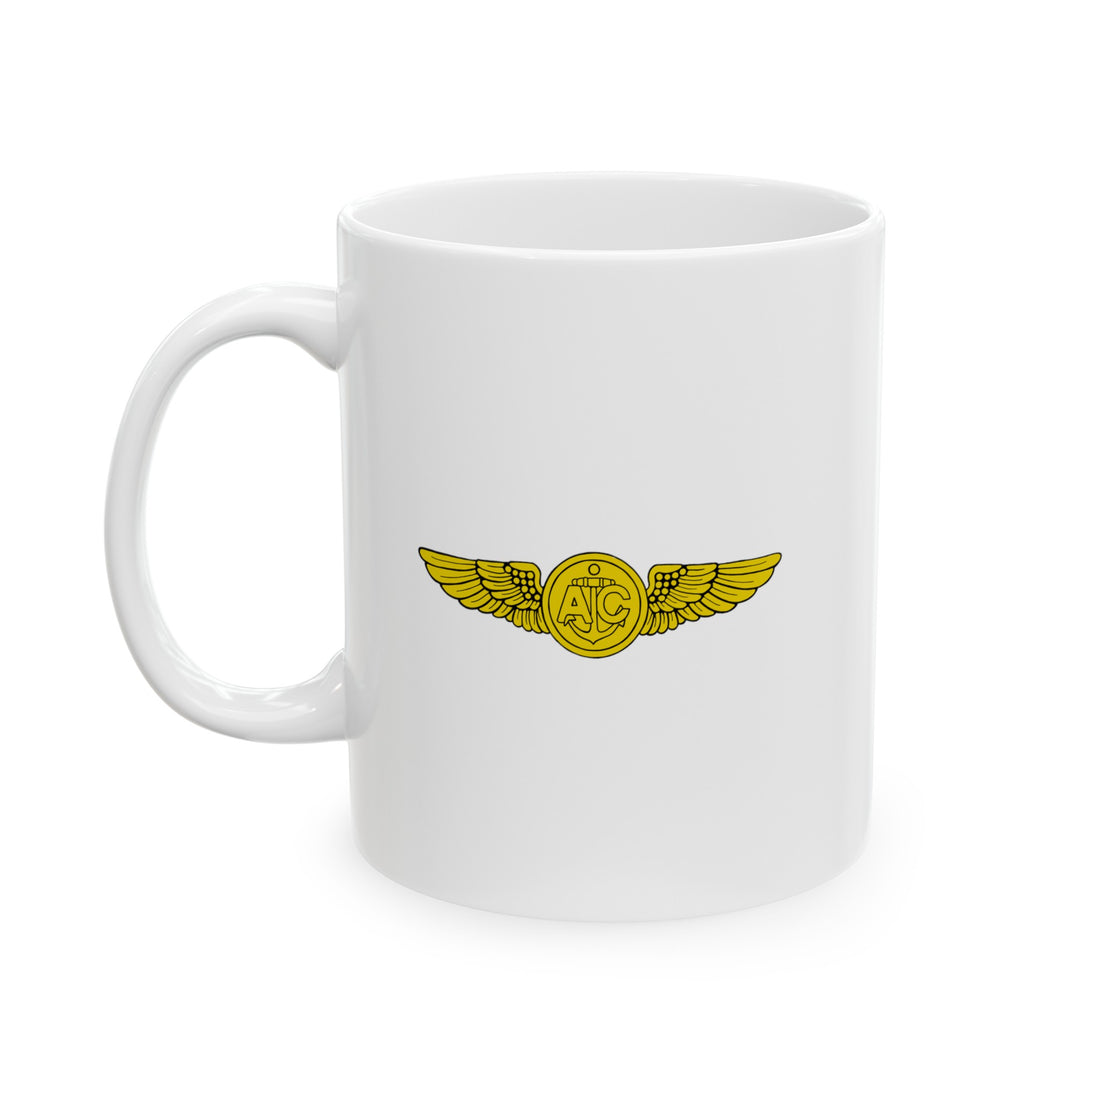 HS-3 "Tridents" Naval Aircrewman Wings Ceramic Mug, Navy Helicopter ASW Squadron flying the SH-3 Sea King